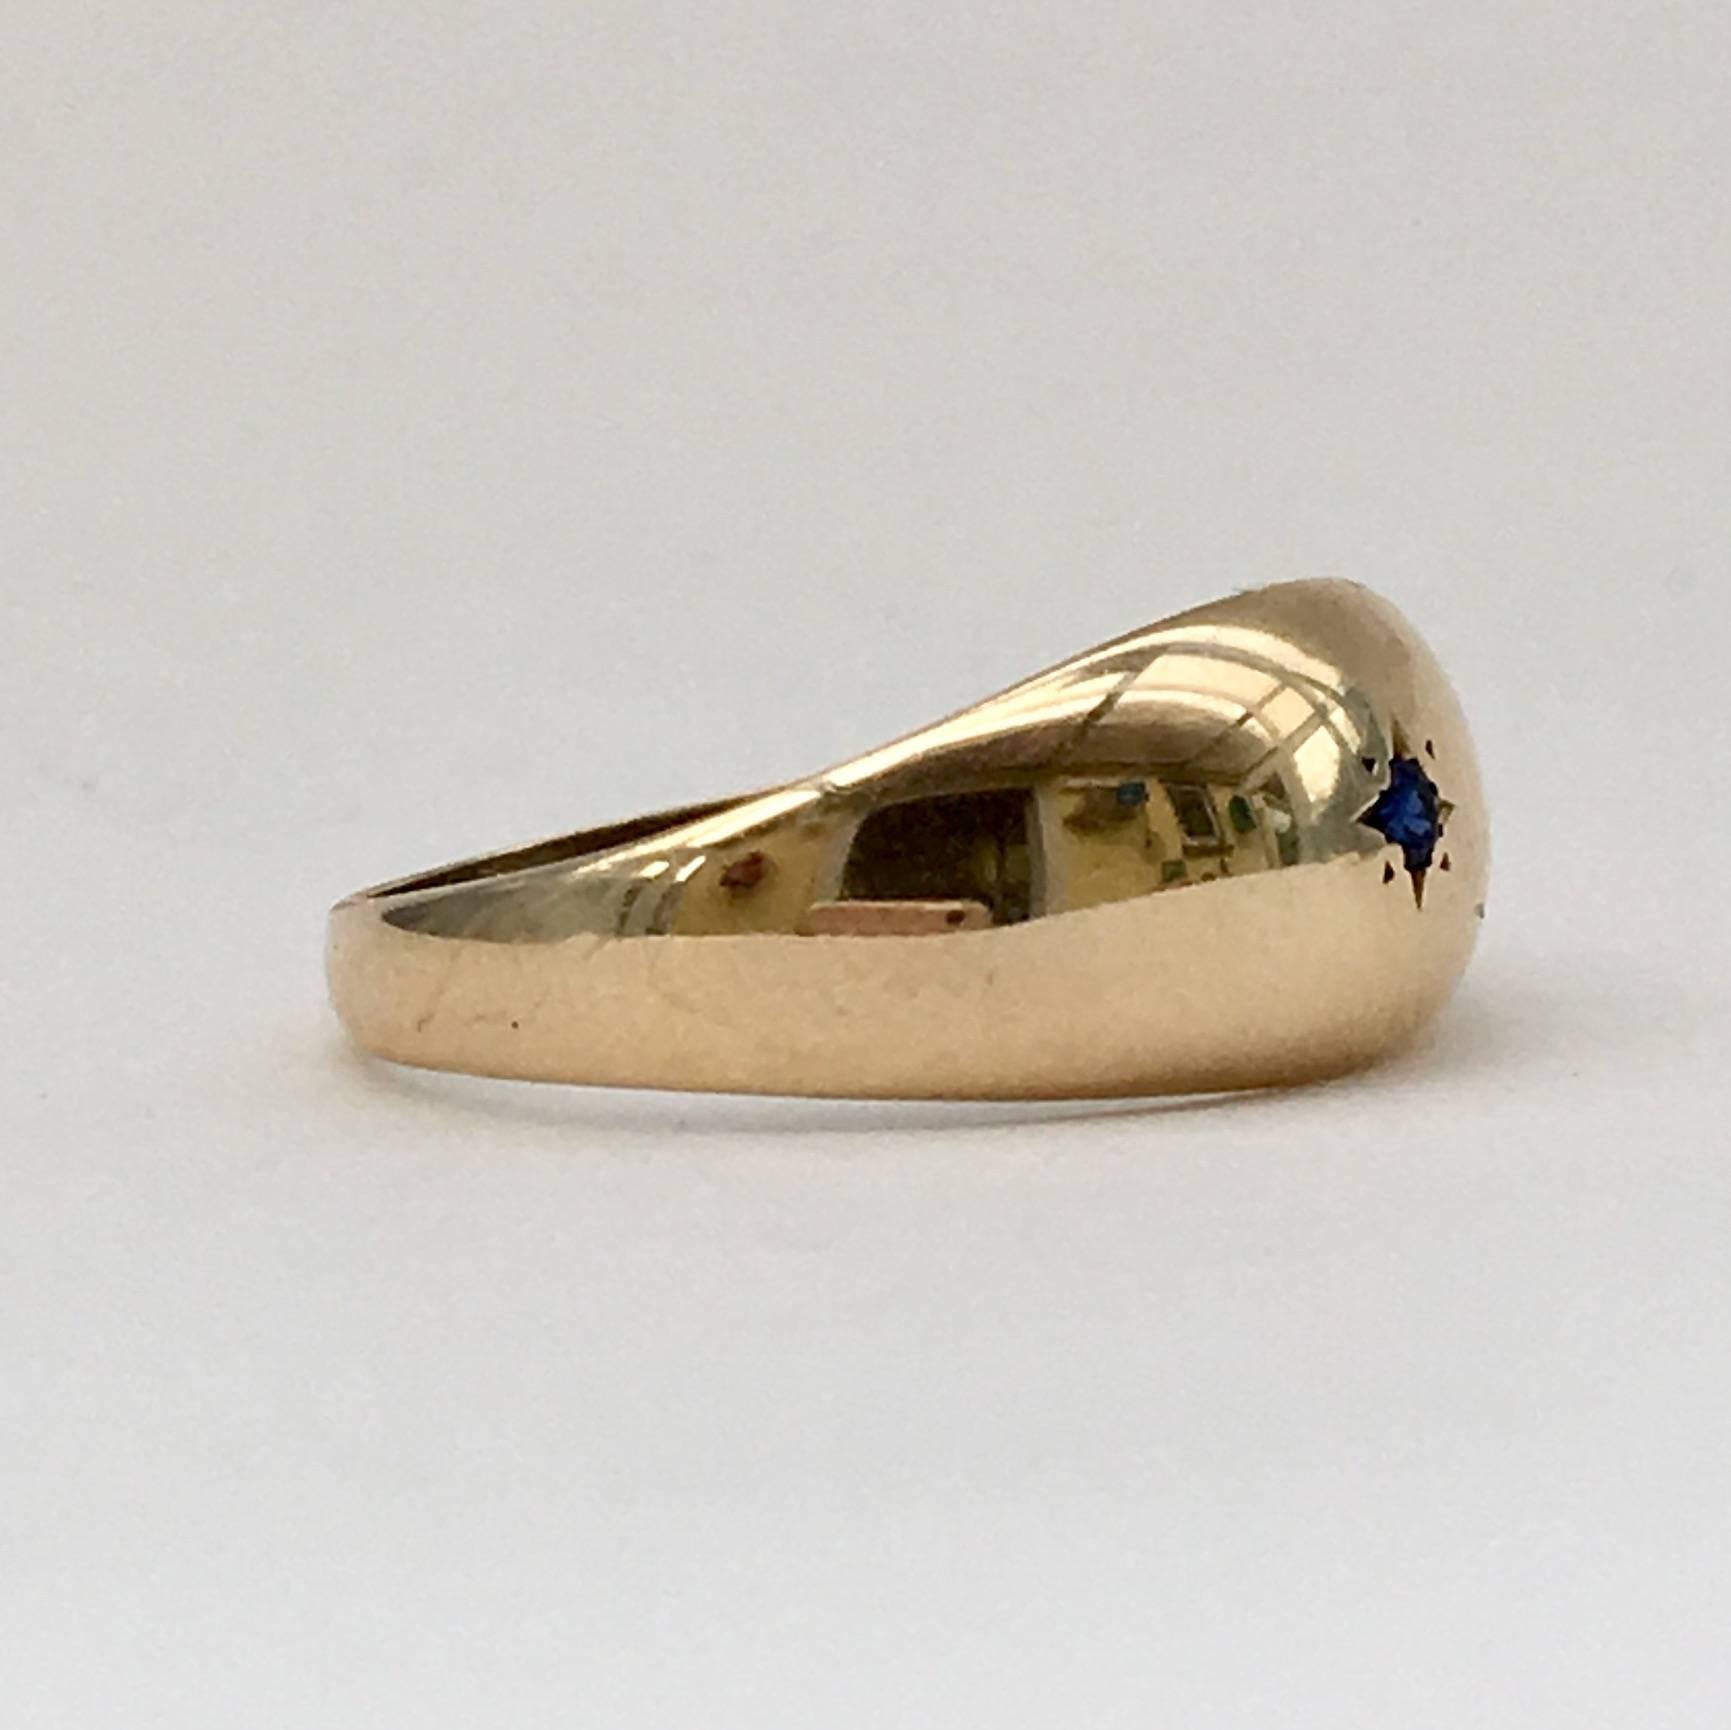 Retro Sapphire Ring 1960s Vintage Jewelry Gypsy Set Star Gold Signet Band Midcentury 